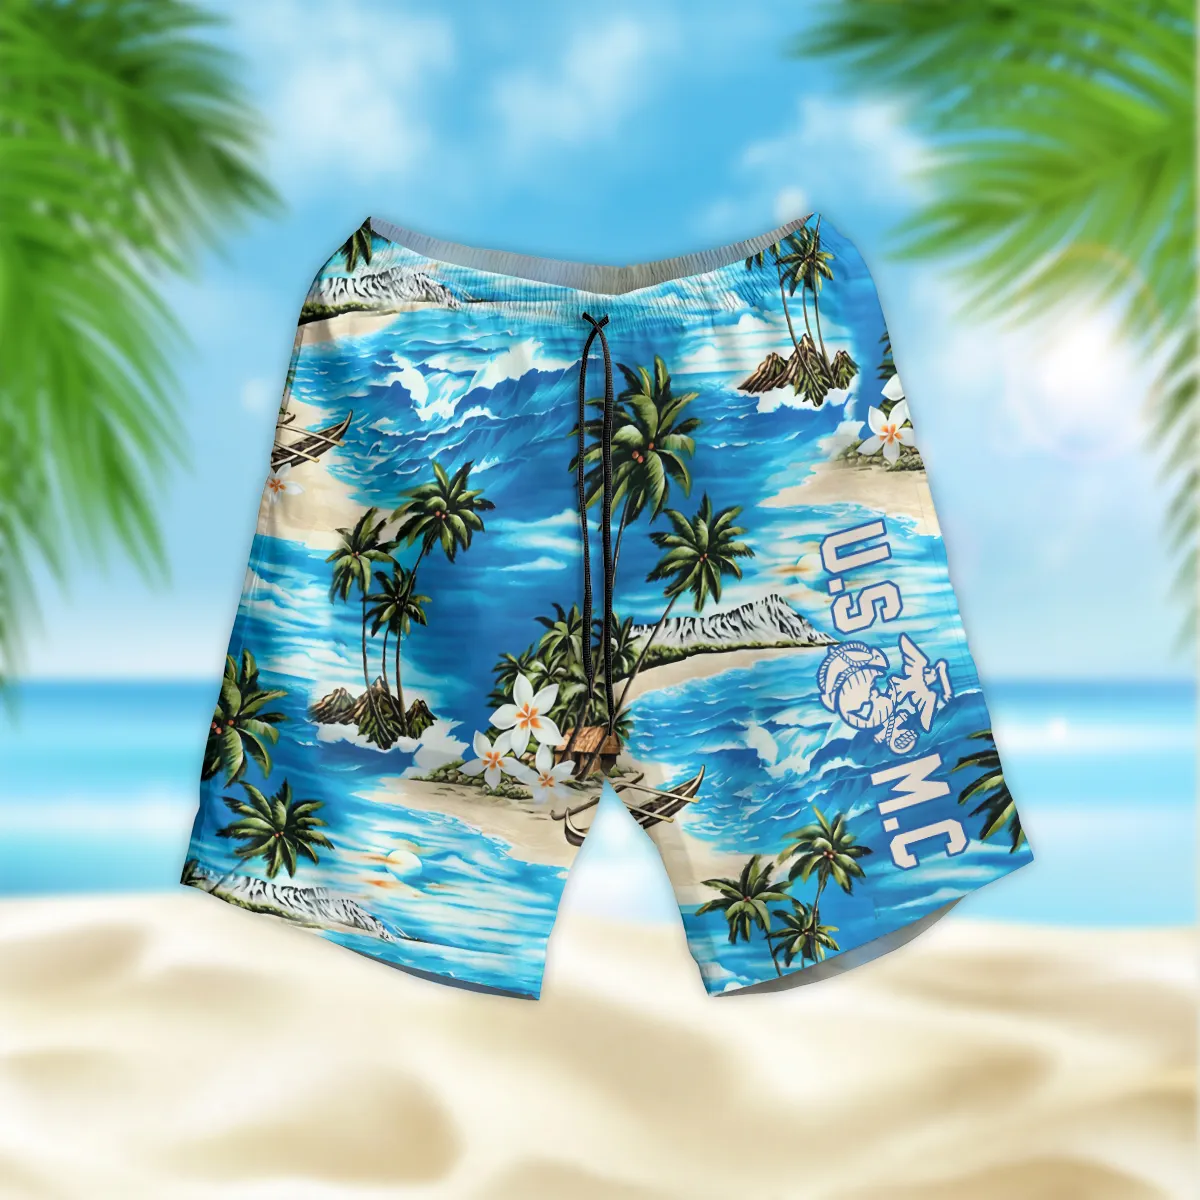 CH-46 Sea Knight Hawaii Style Palm Tree U.S. Marine Corps Beach Short All Over Prints Gift Loves